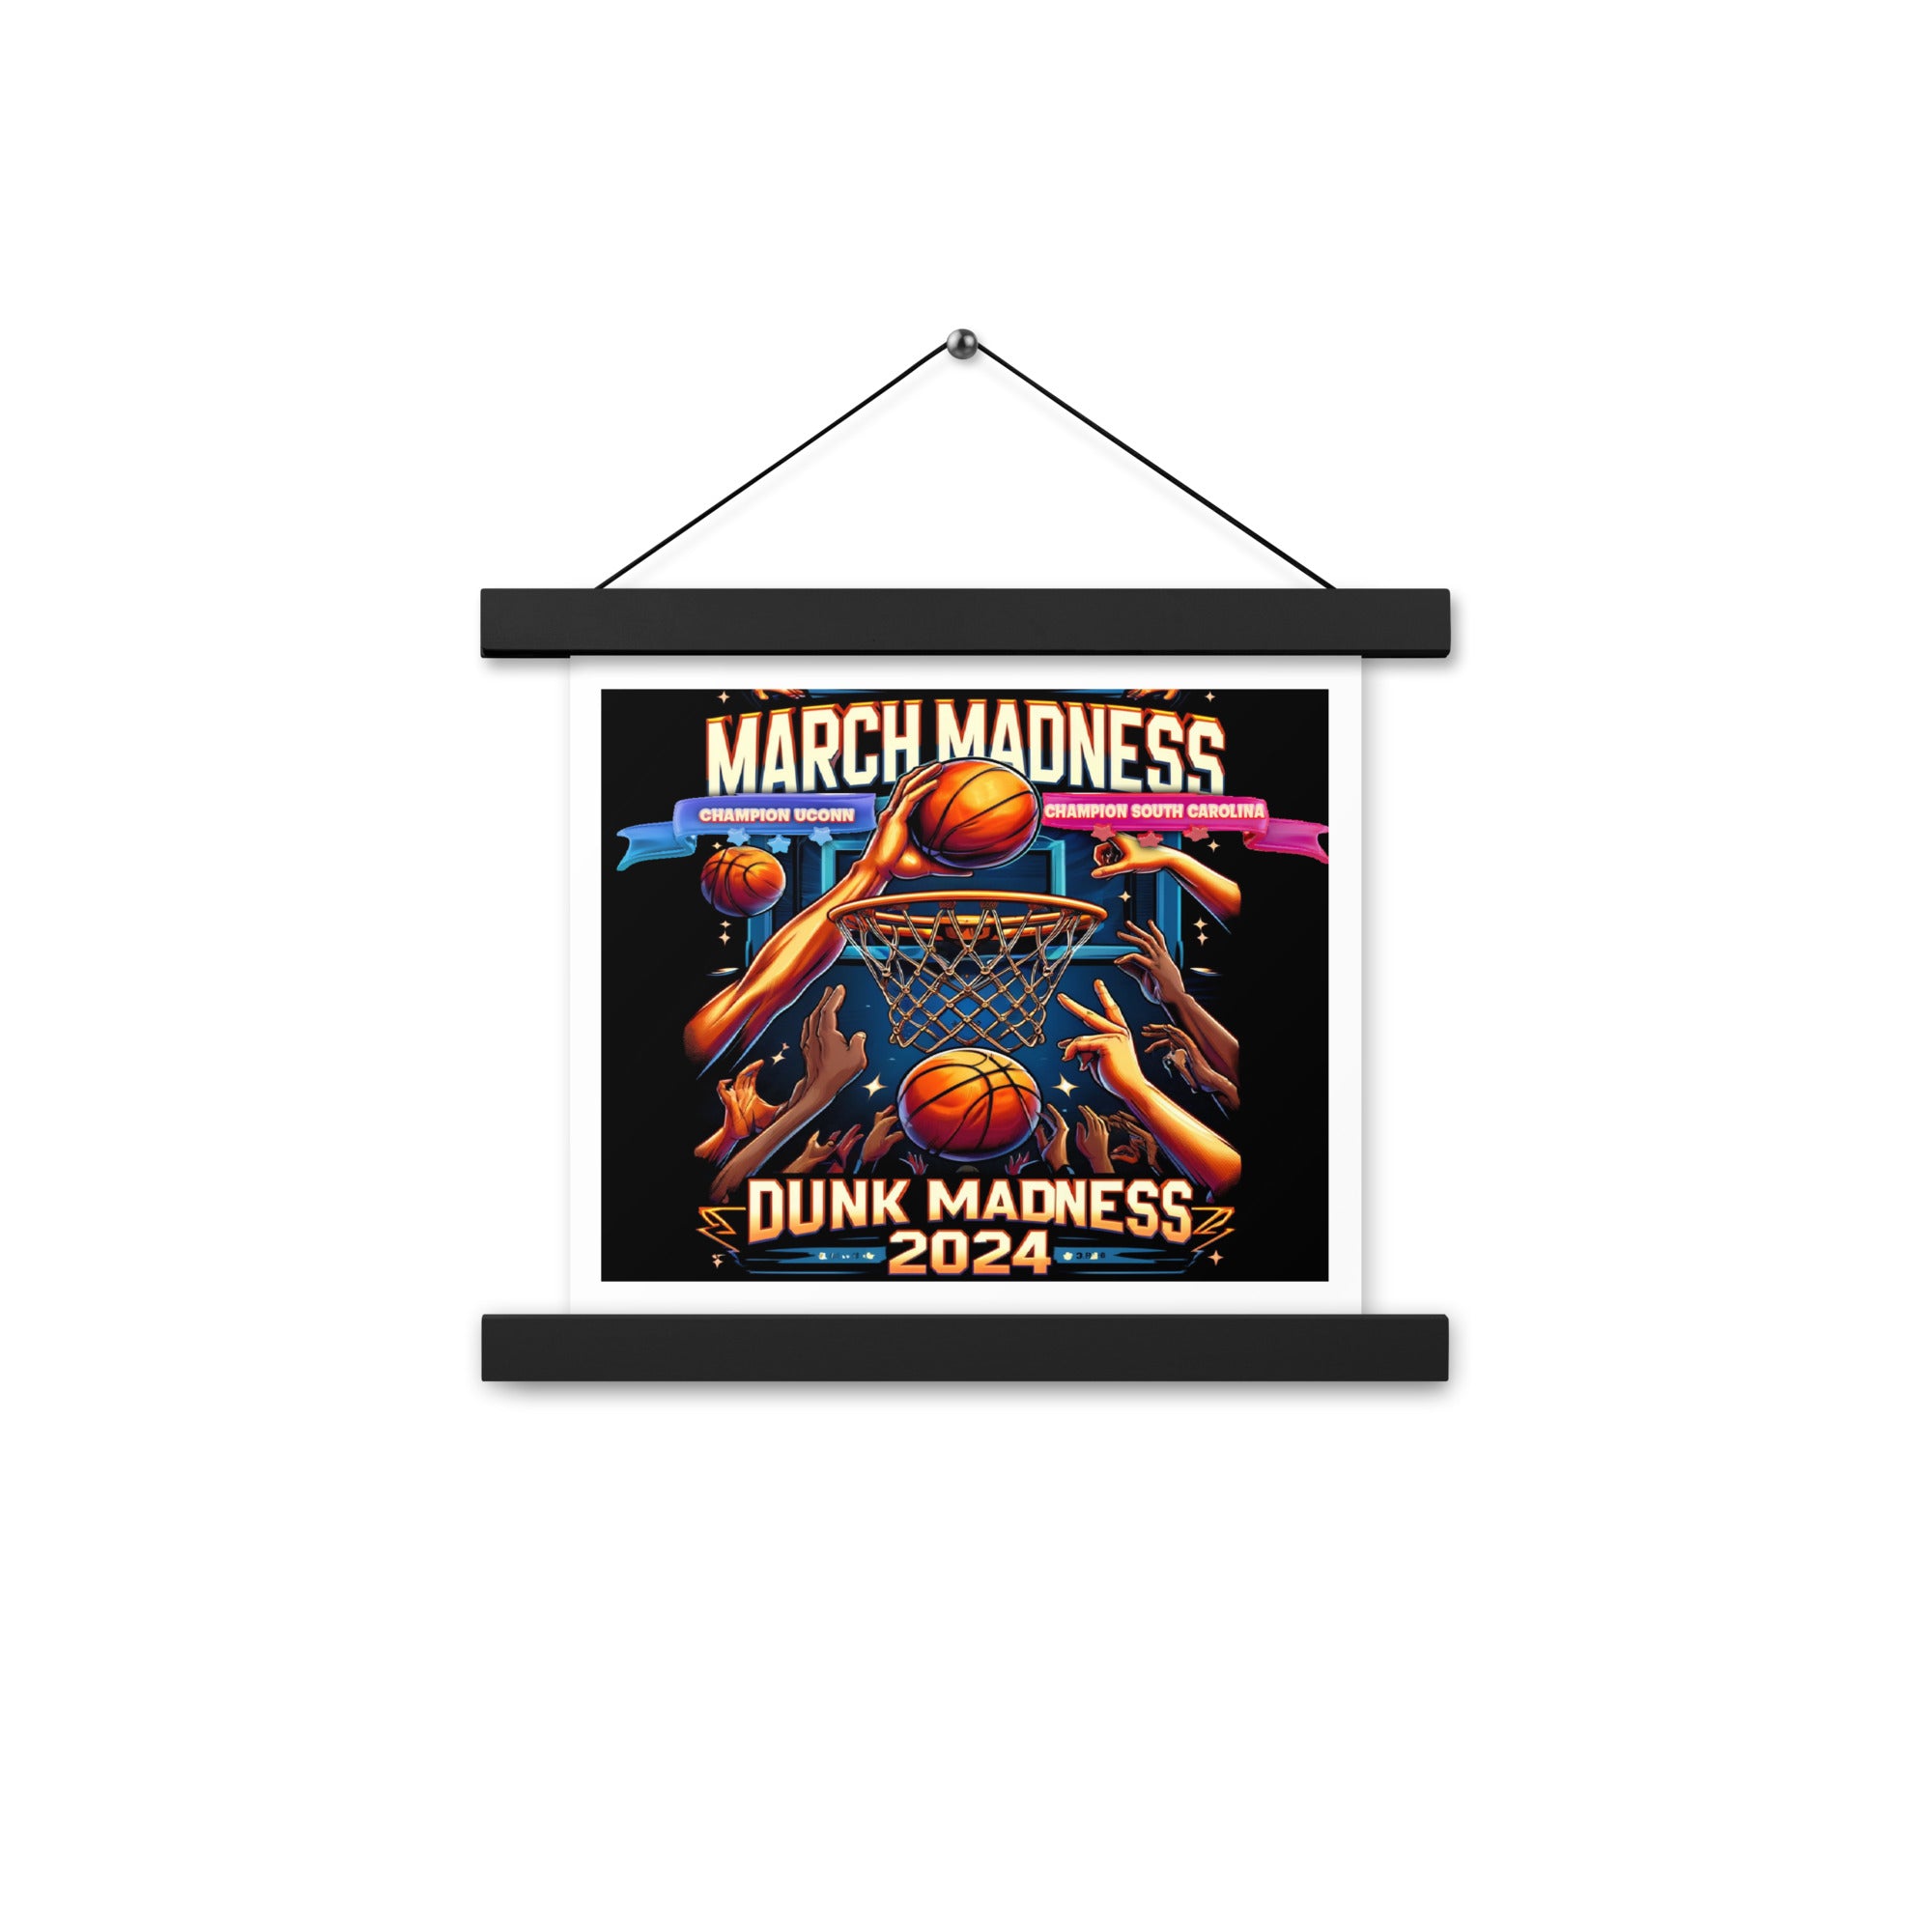 Merch Madness Dunk Madness Poster with hangers